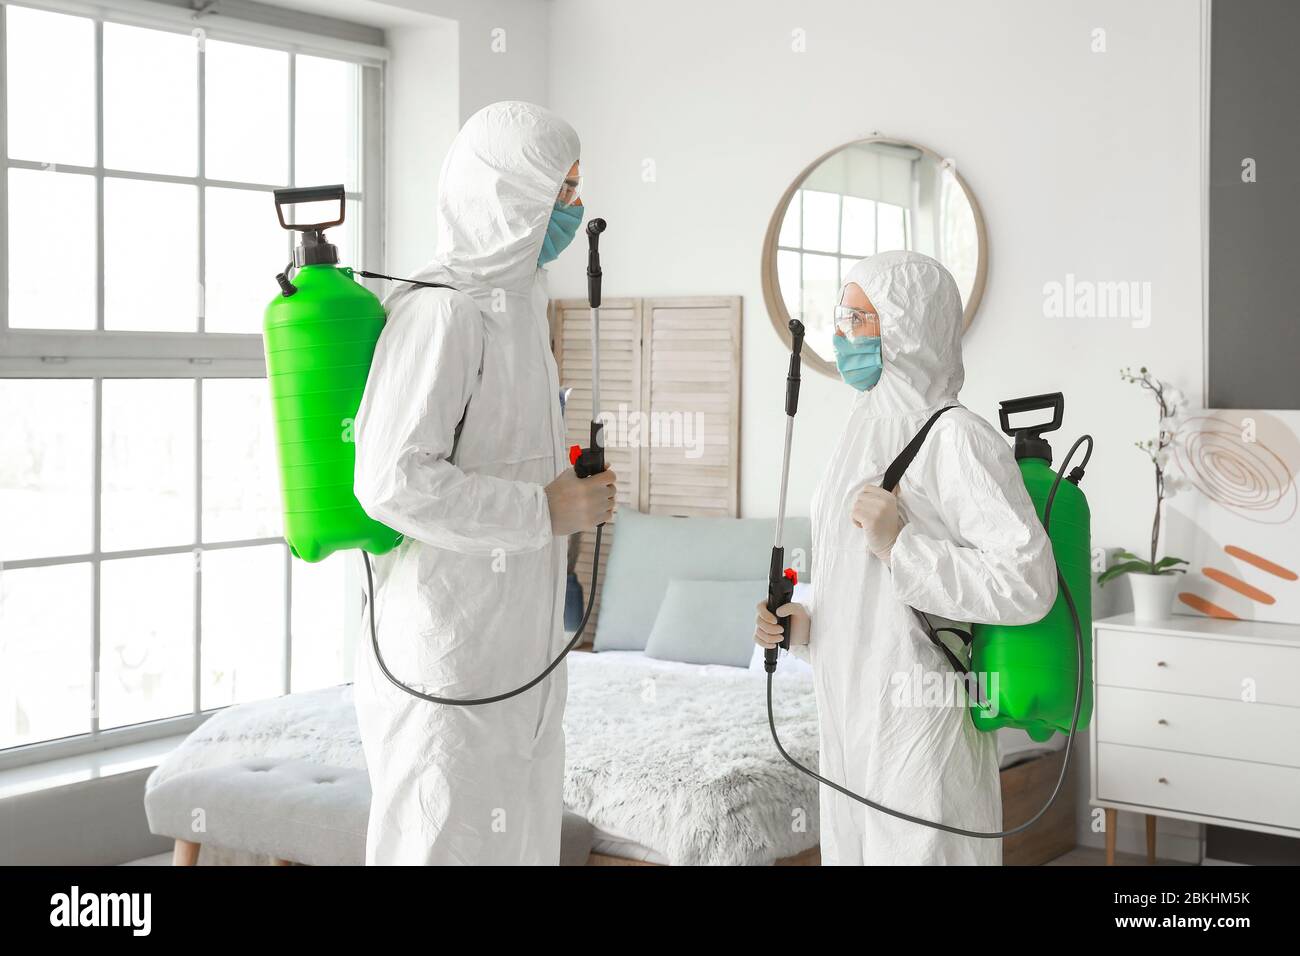 Workers in biohazard suits disinfecting house Stock Photo